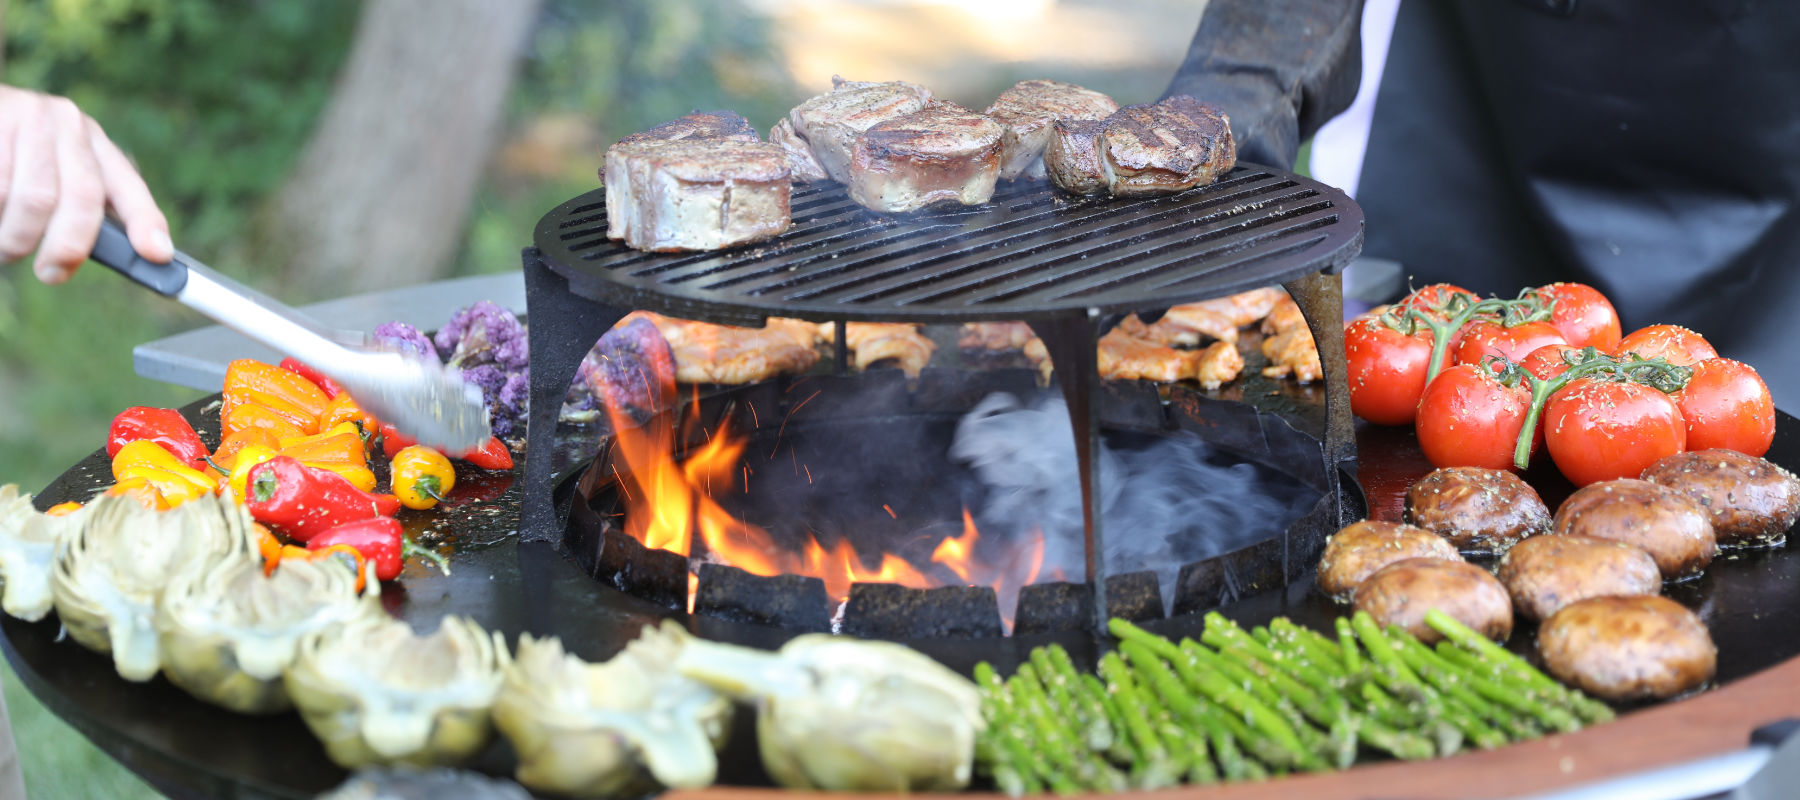 Pre-Grill Preparation: Heating the Grill the Wolfgang Puck Way